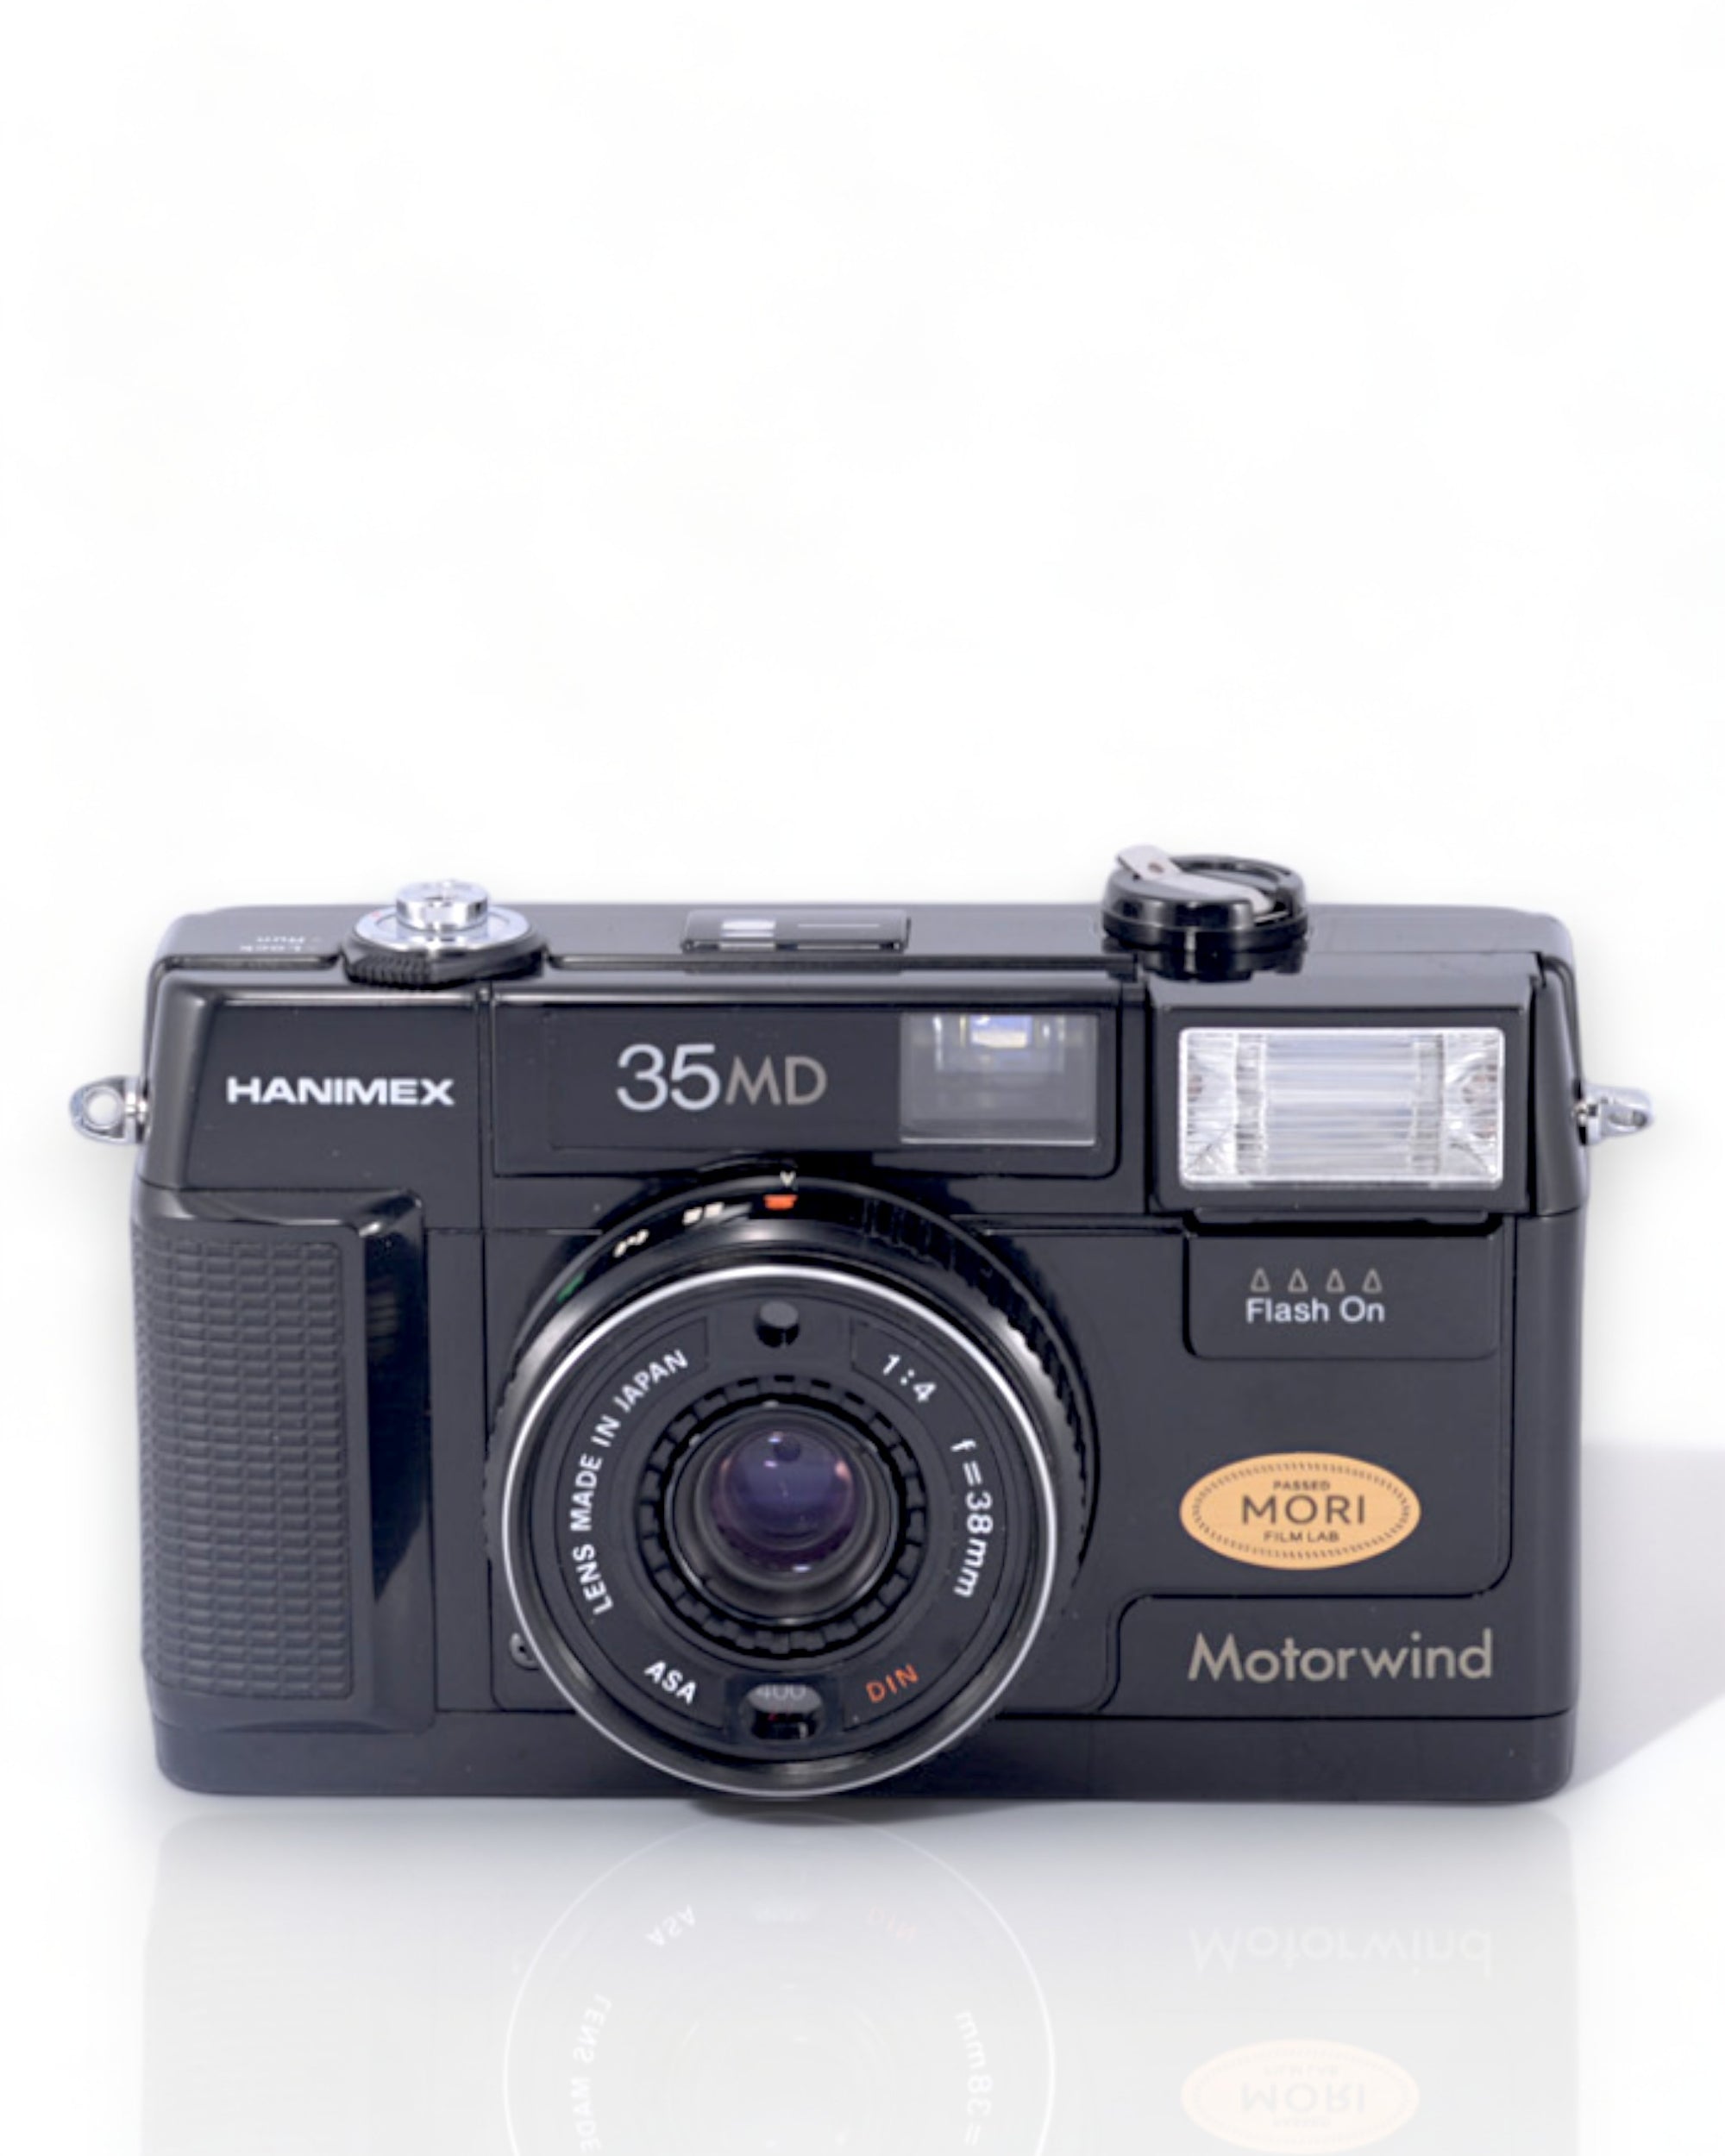 Hanimex 35MD 35mm point & shoot film camera with 38mm f4 lens